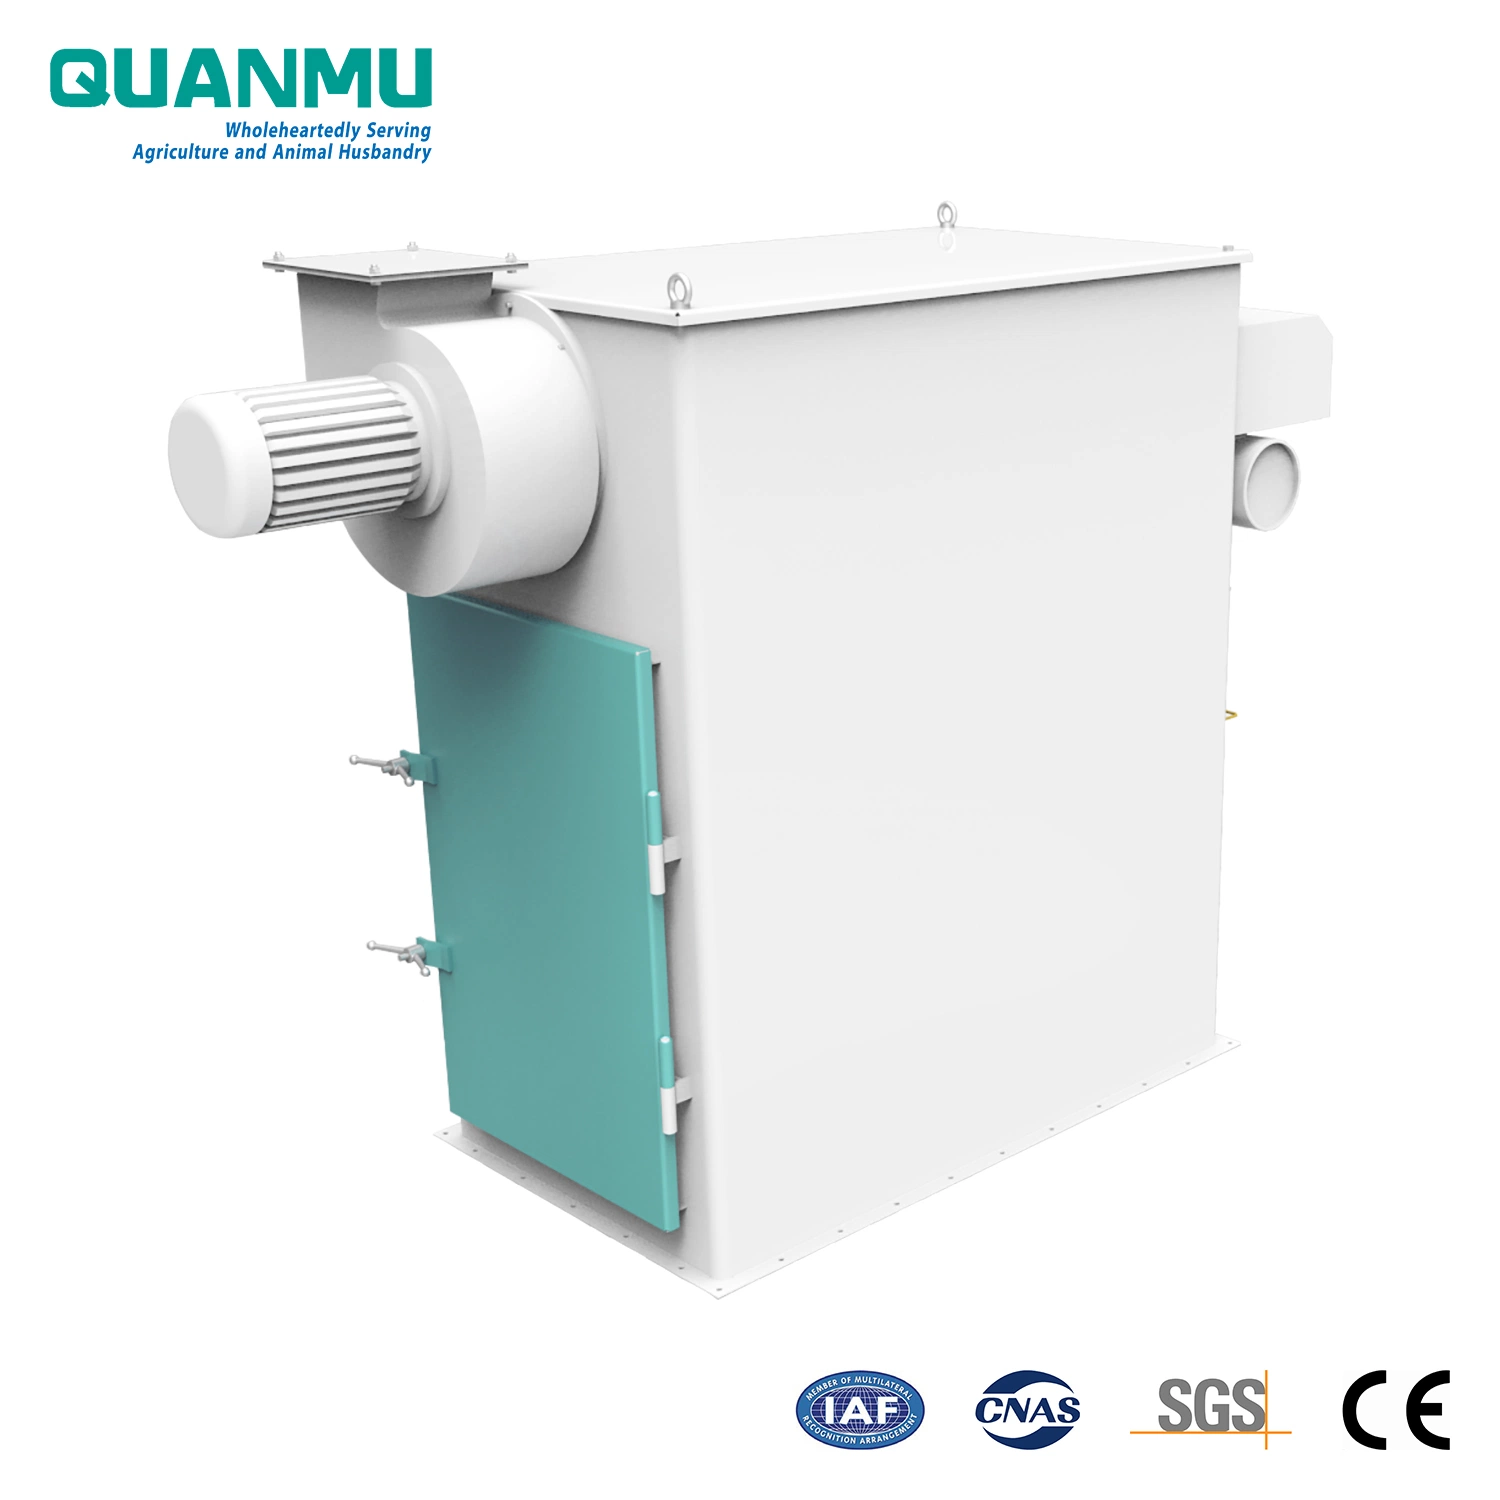 Small-Scale High Pressure Jet Flat Bag Industrial Air Dust Control Equipment for Animal Feed Processing Machinery